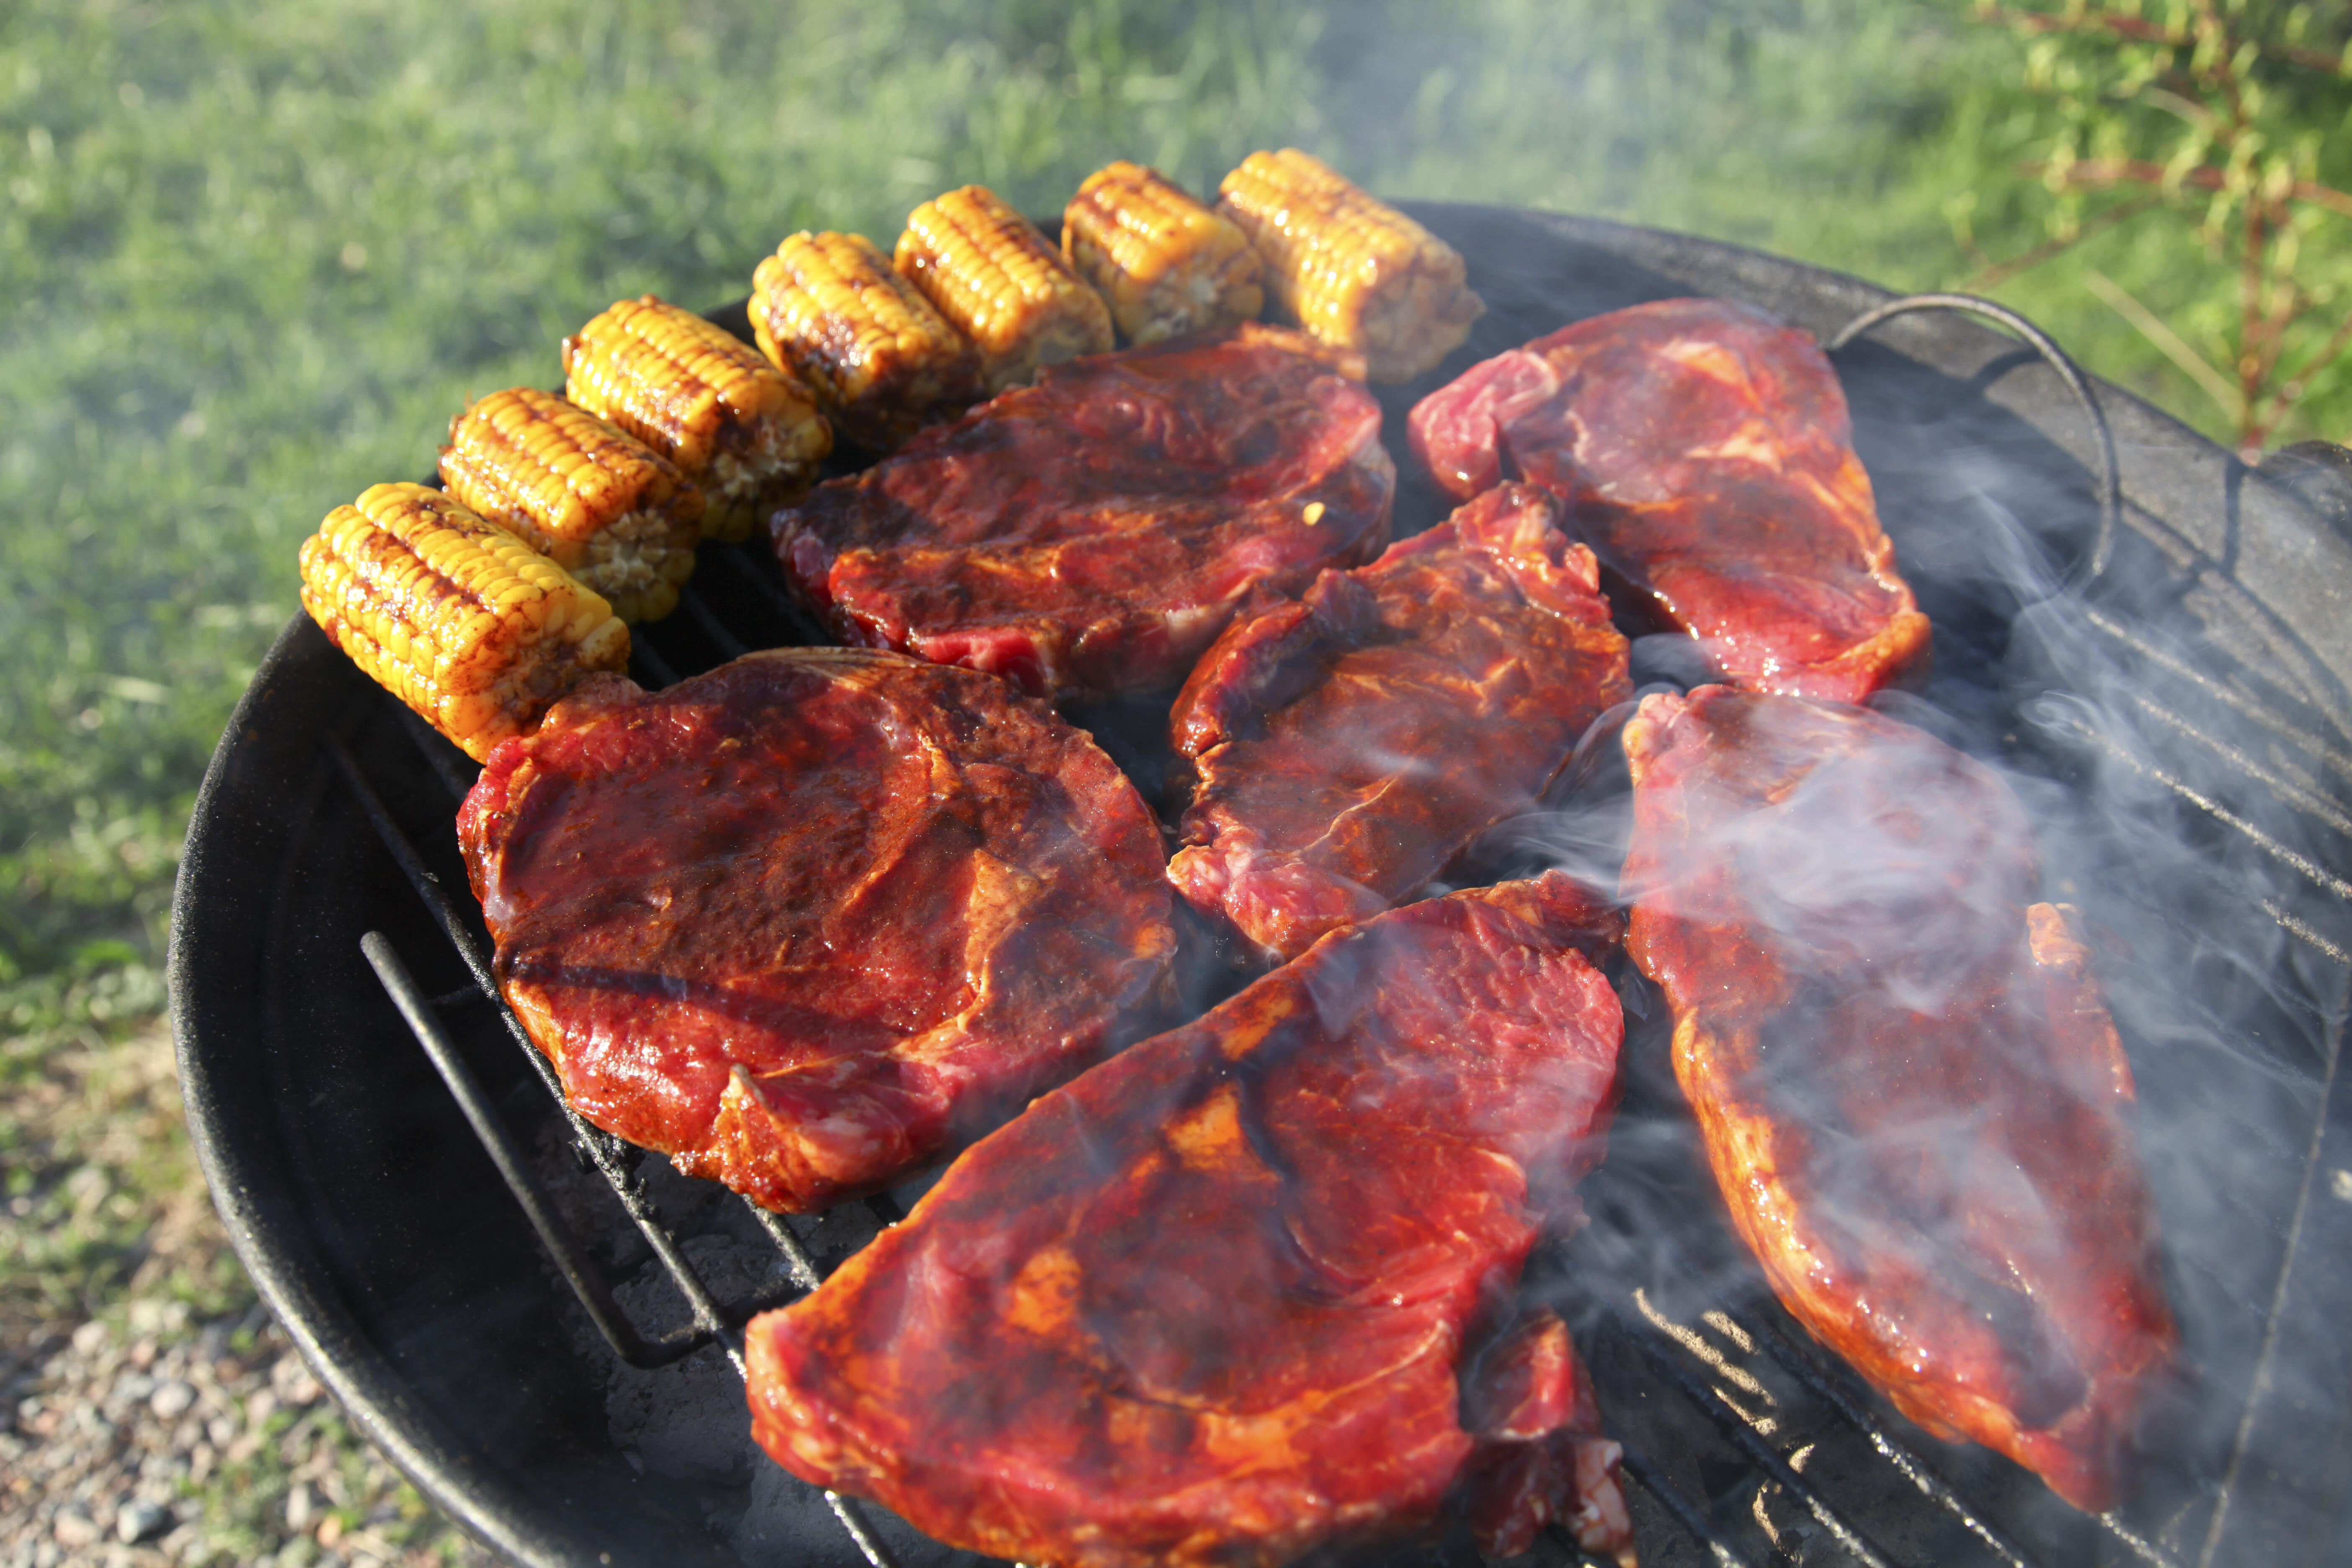 Close detail of meat and cob of corn laying on a barbeque grill with smoke